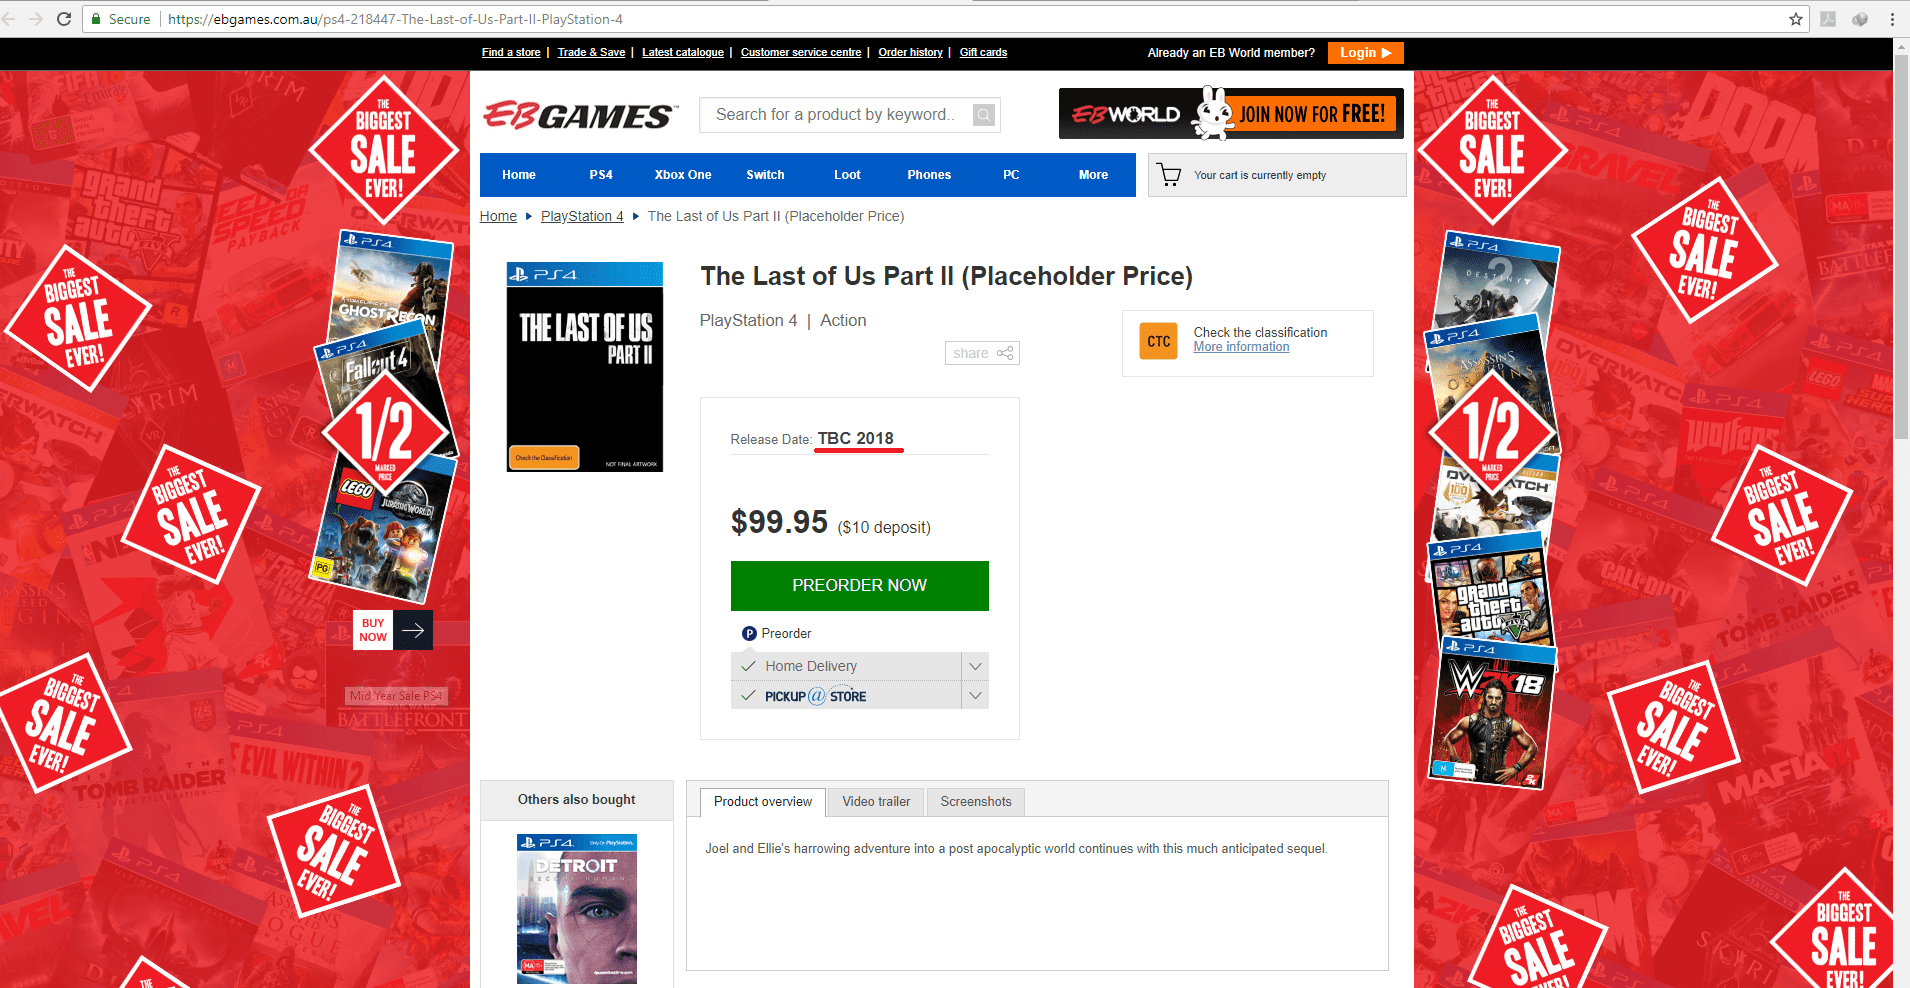 The Last of Us Part 2 EB Games